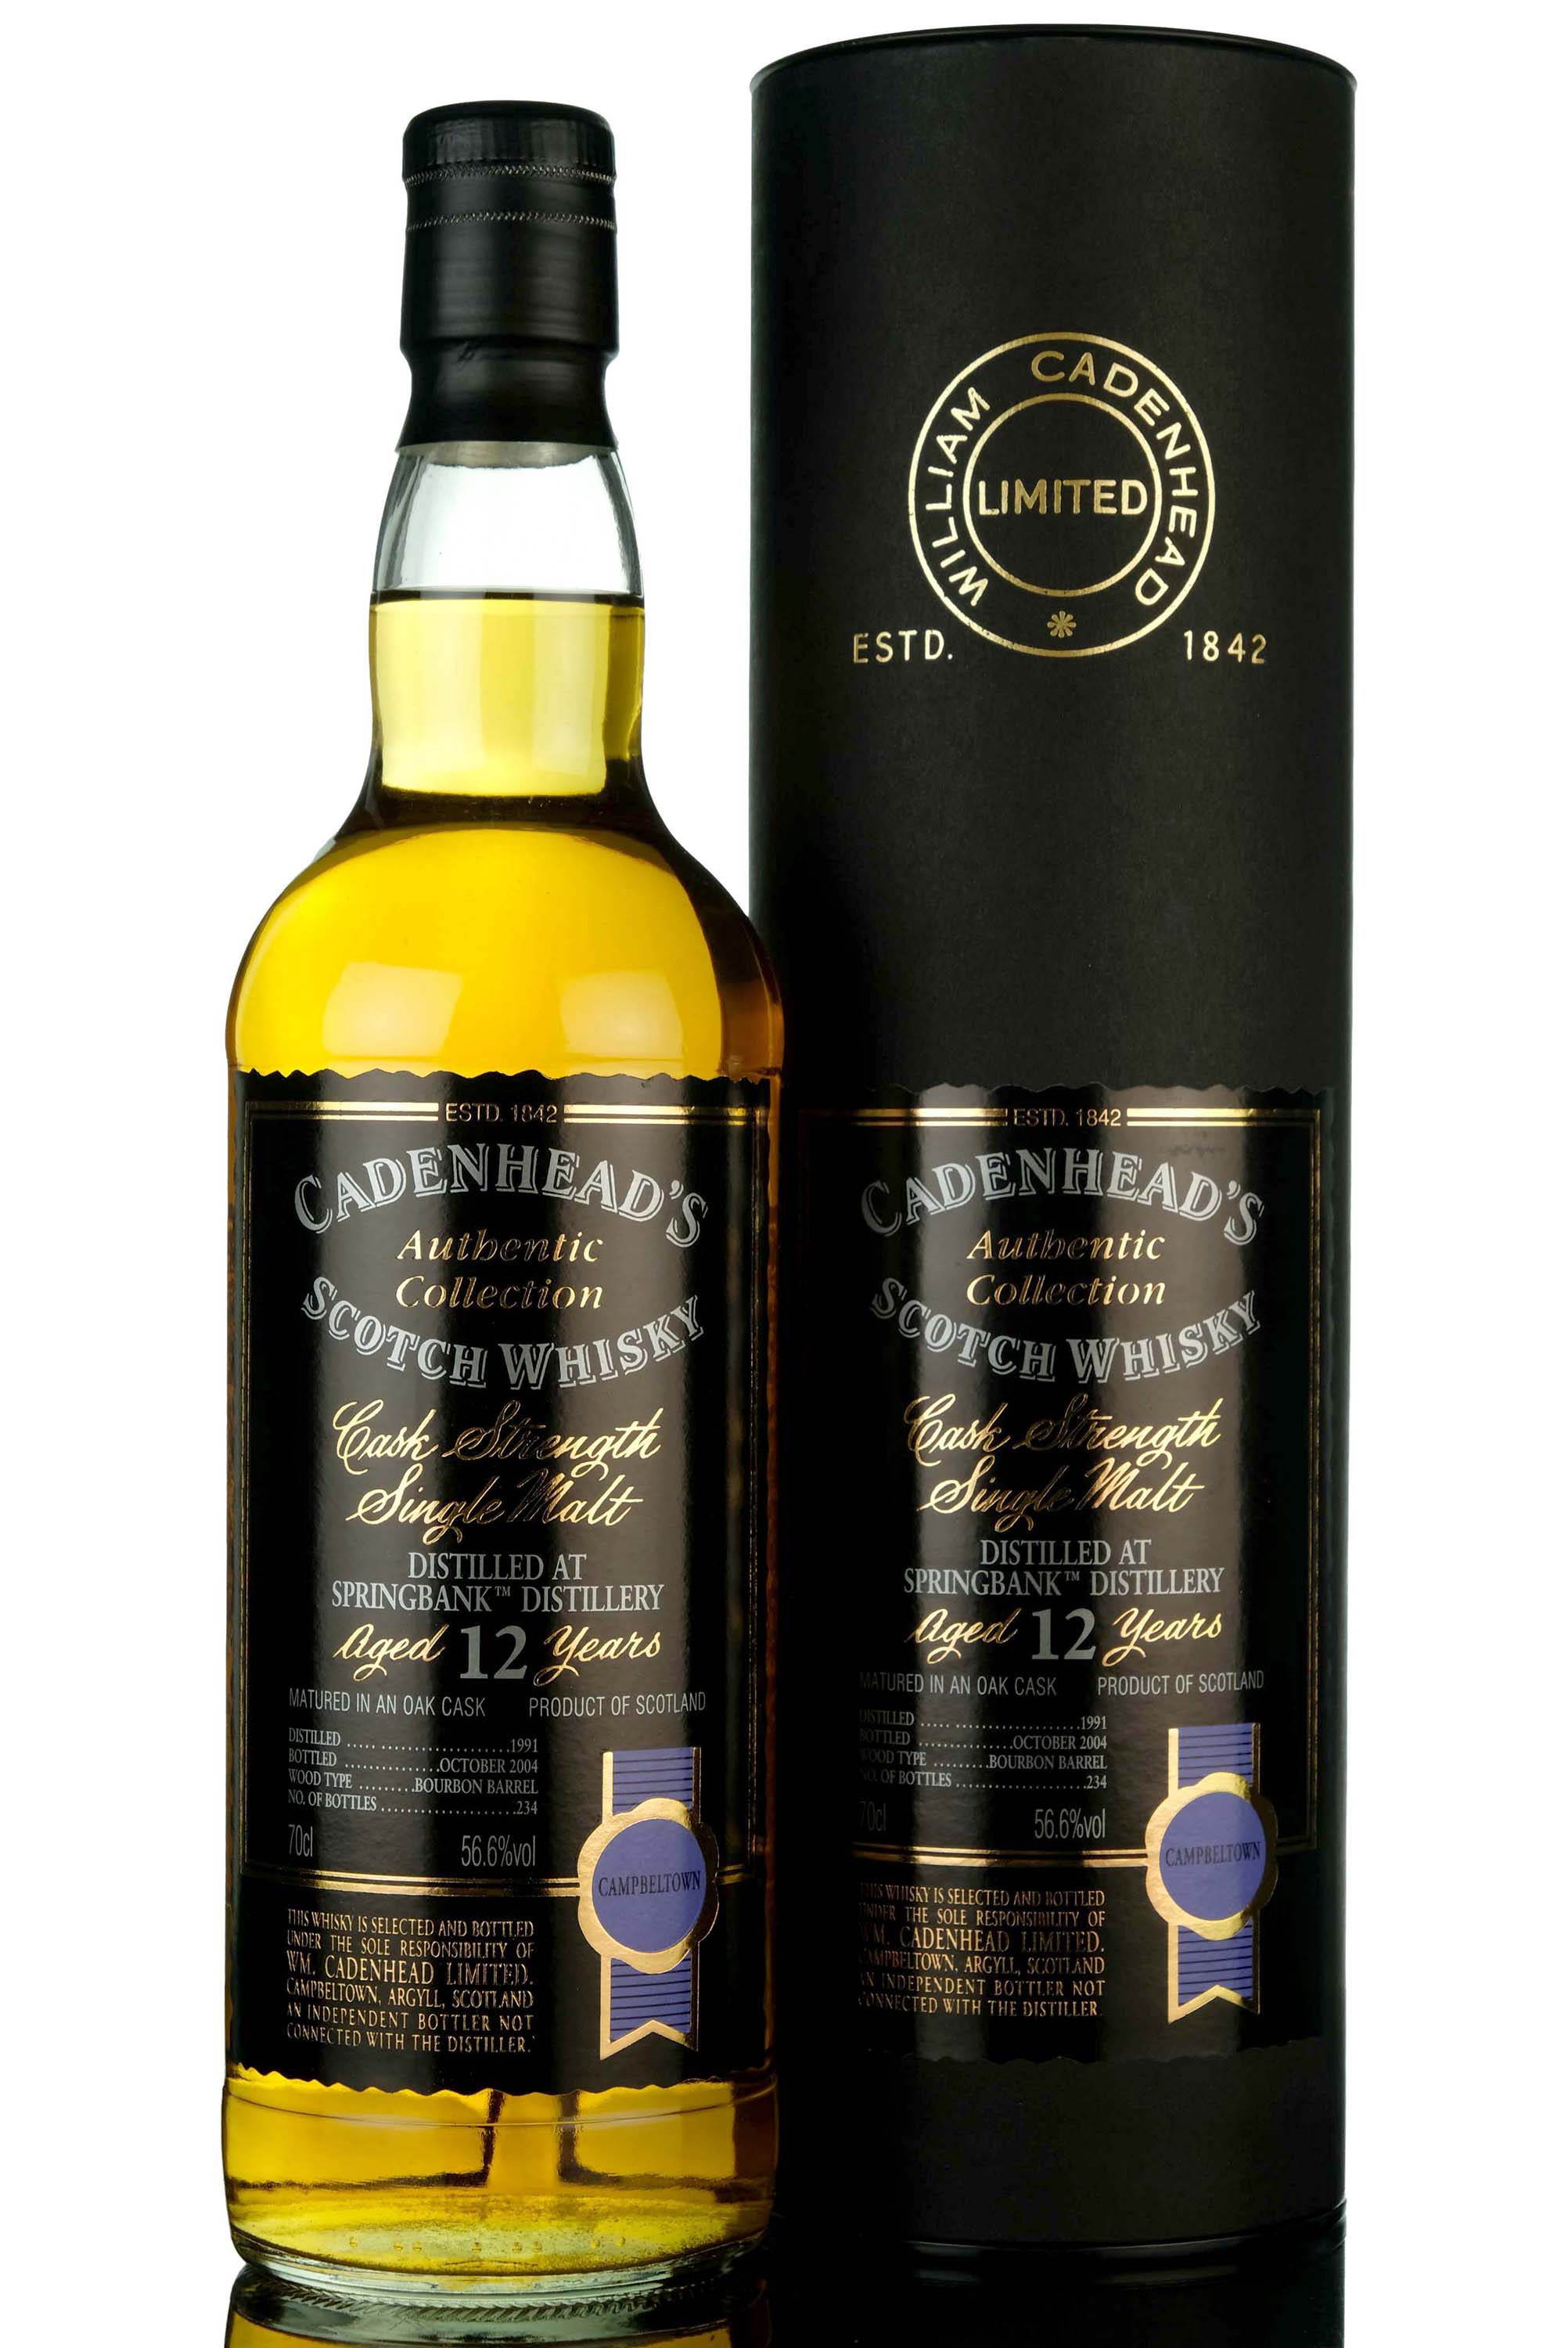 Springbank 1991-2004 - 12 Year Old - Cadenheads Authentic Collection - Single Cask